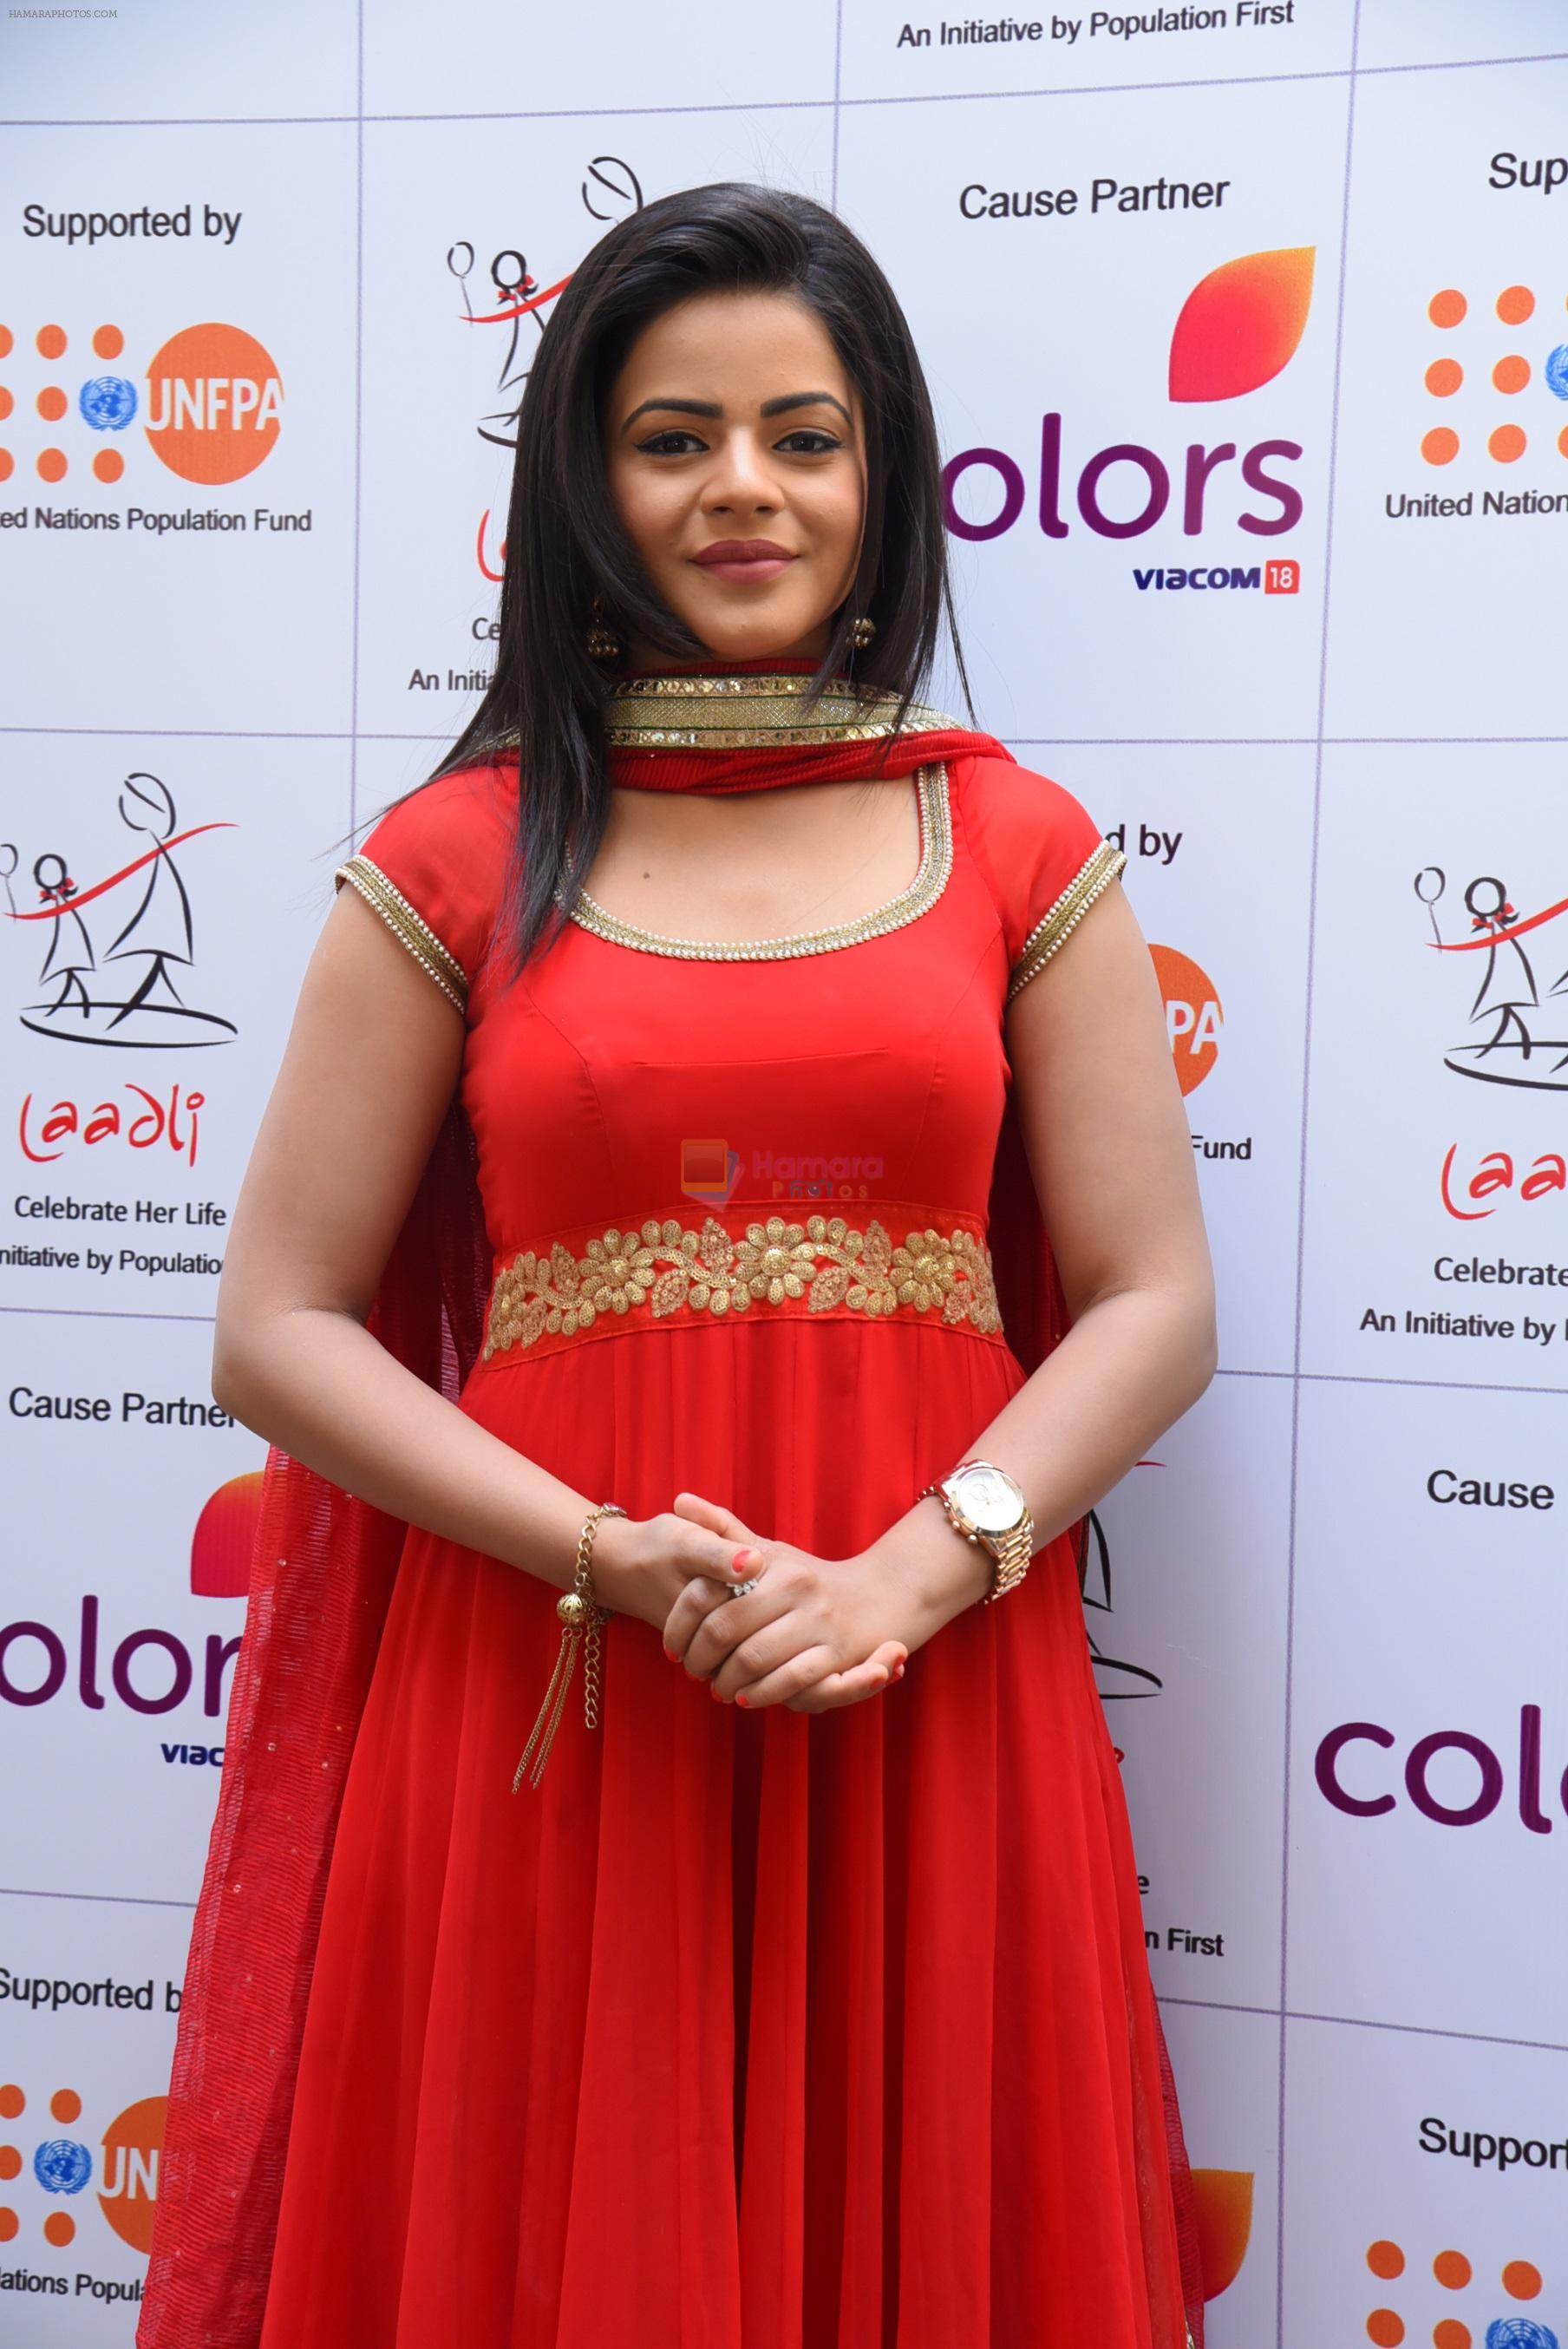 Jigyasa Singh aka Thapki at a press meet as COLORS joins hands with Laadli